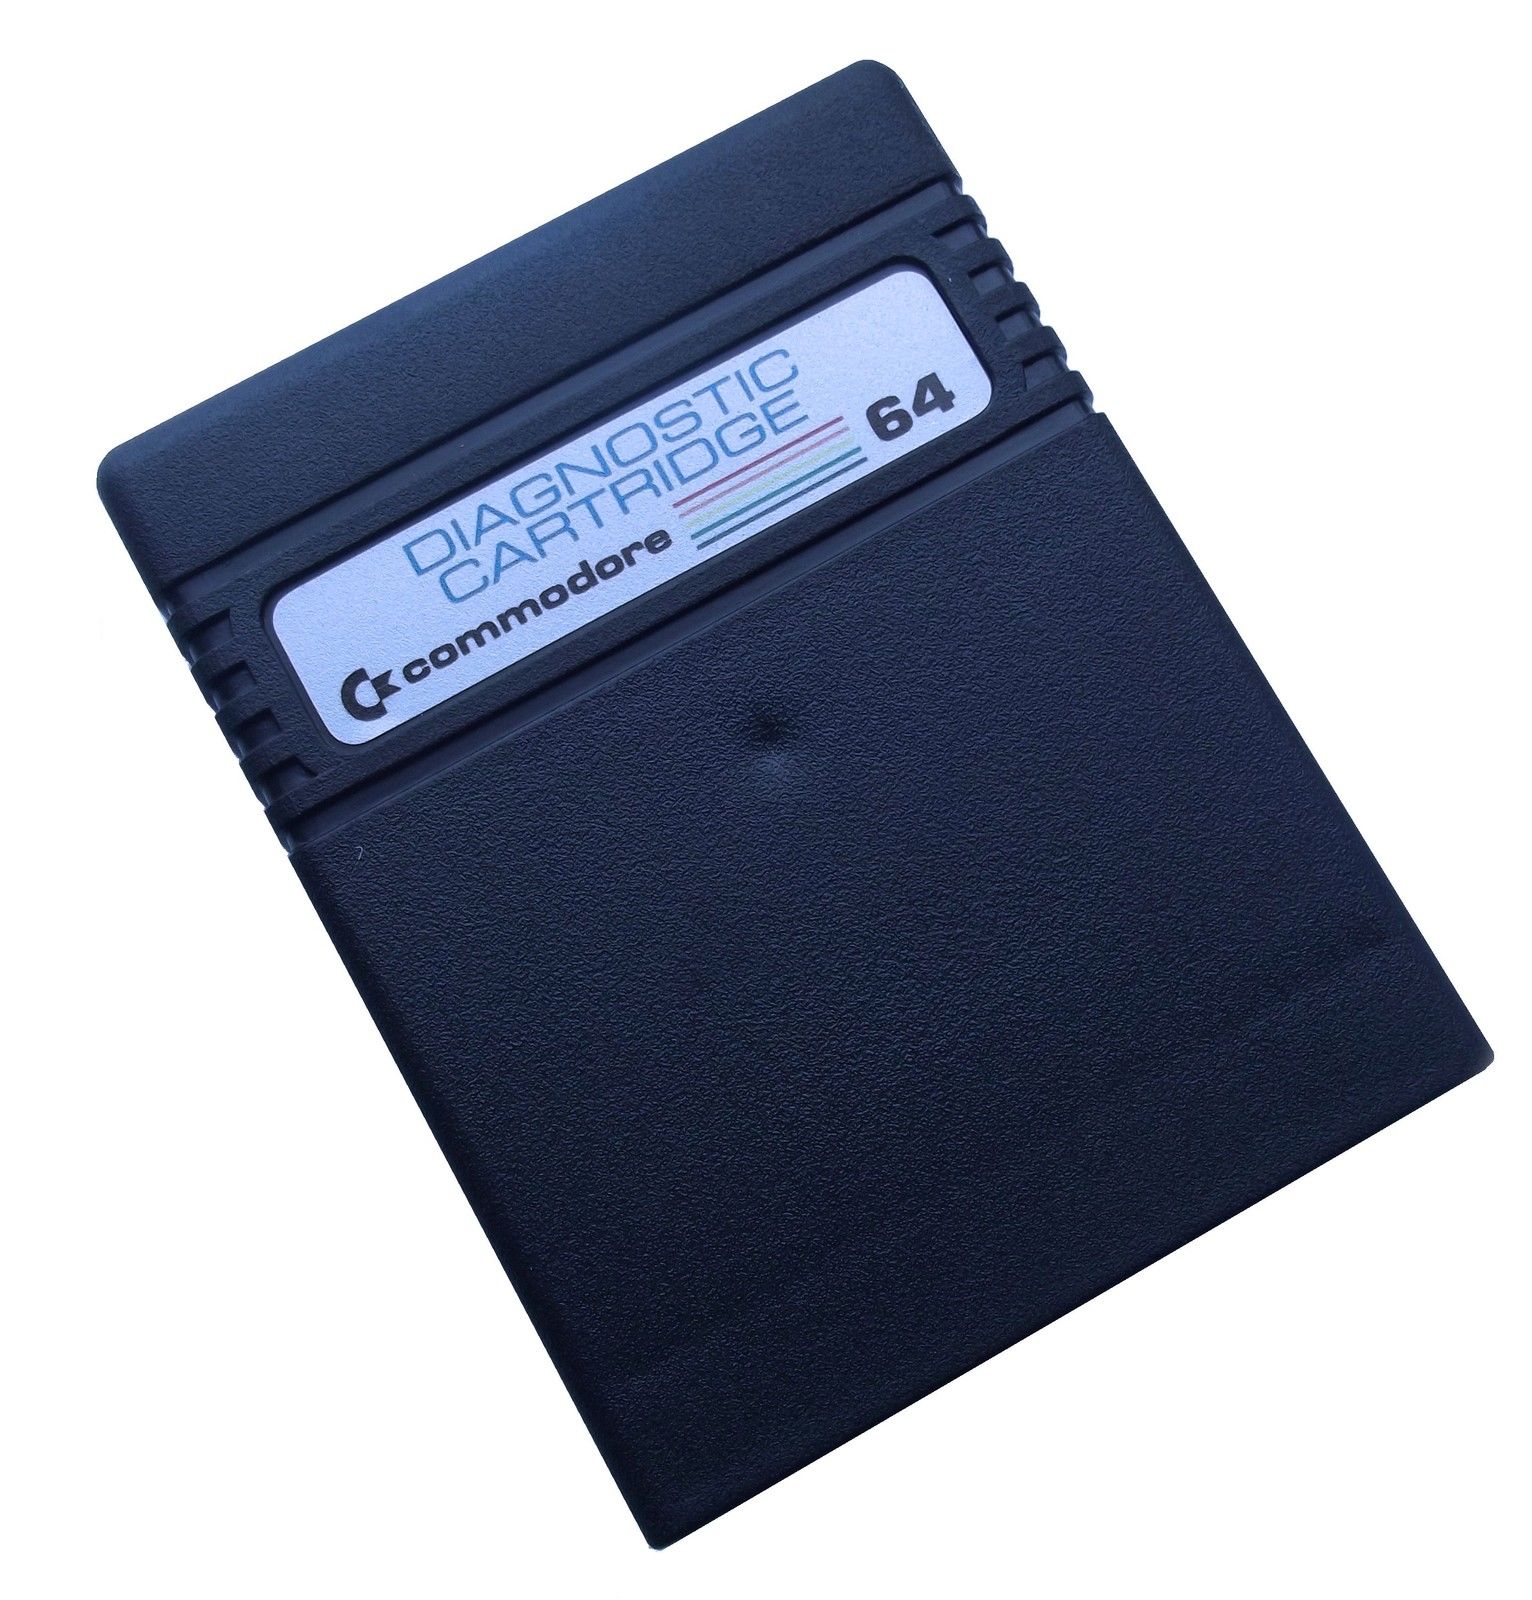 Diagnostic_cart586220-2 Diagnostic Test Cartridge With Port Testers Commodore 64 P/N 324528-02